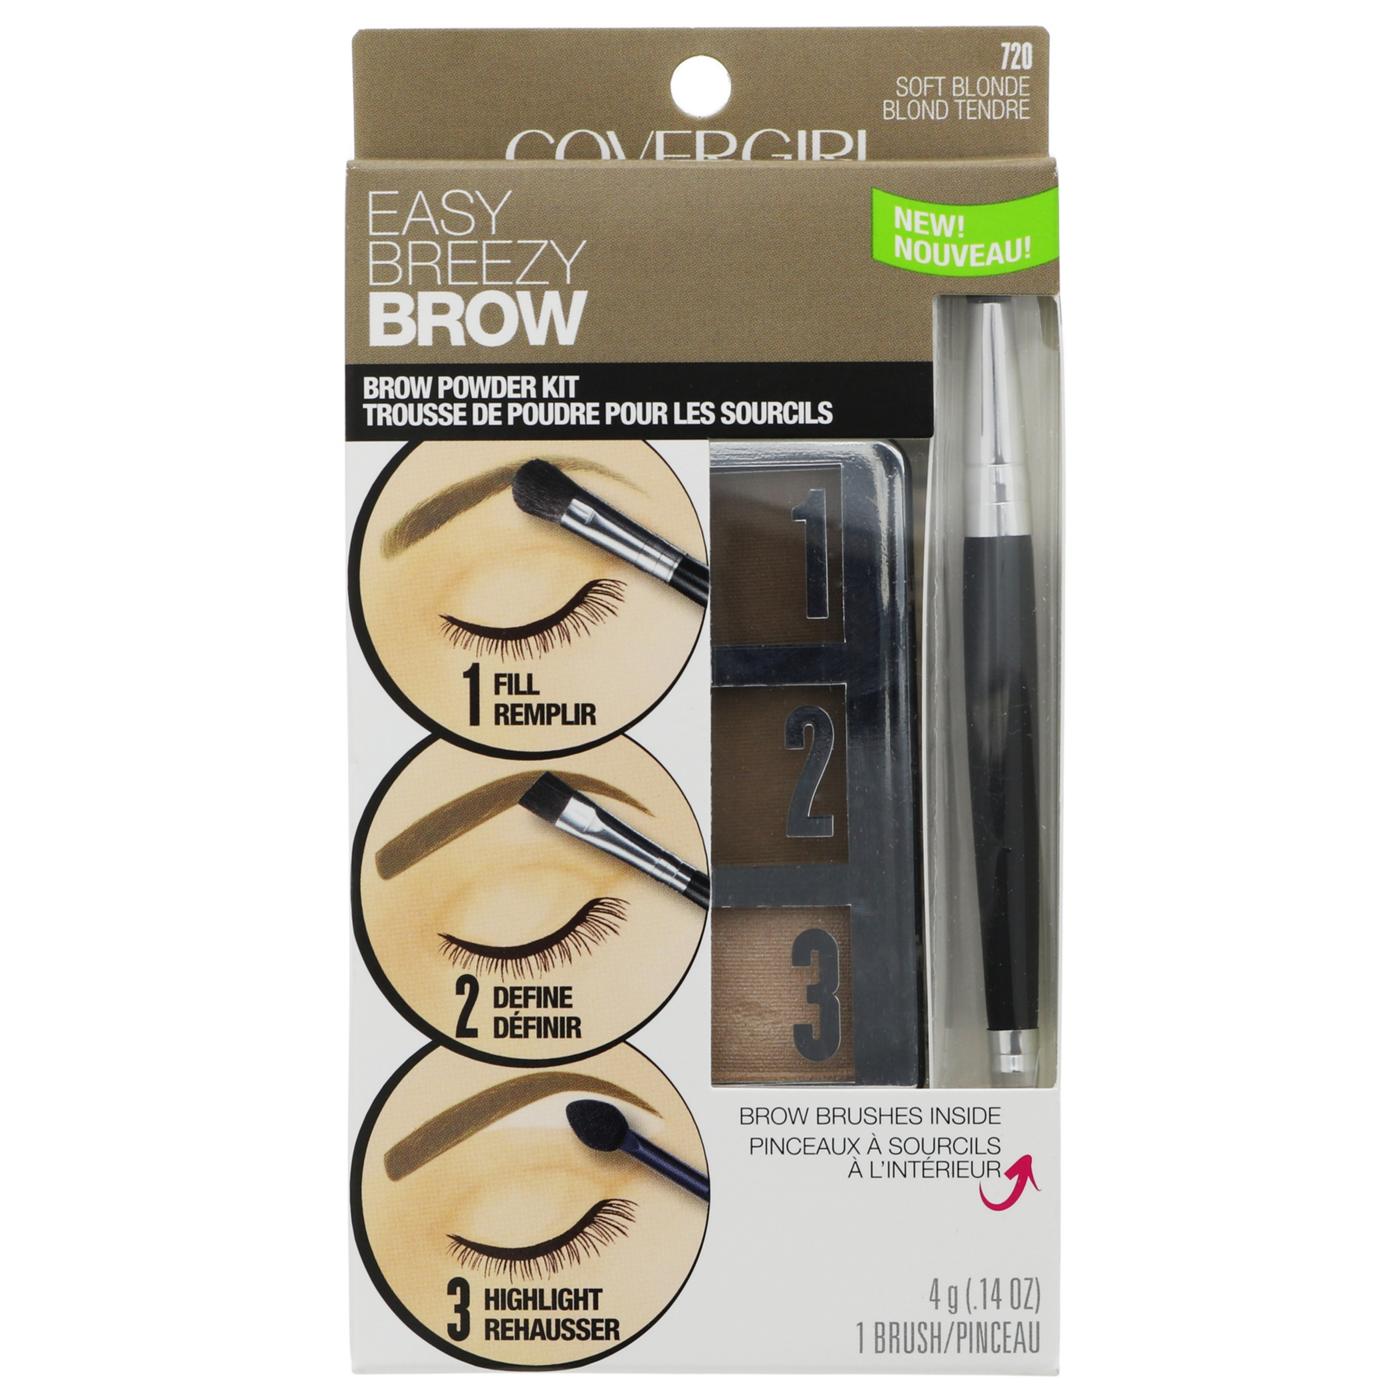 Covergirl Easy Breezy Brow Powder Kit 720 Soft Blonde; image 1 of 7